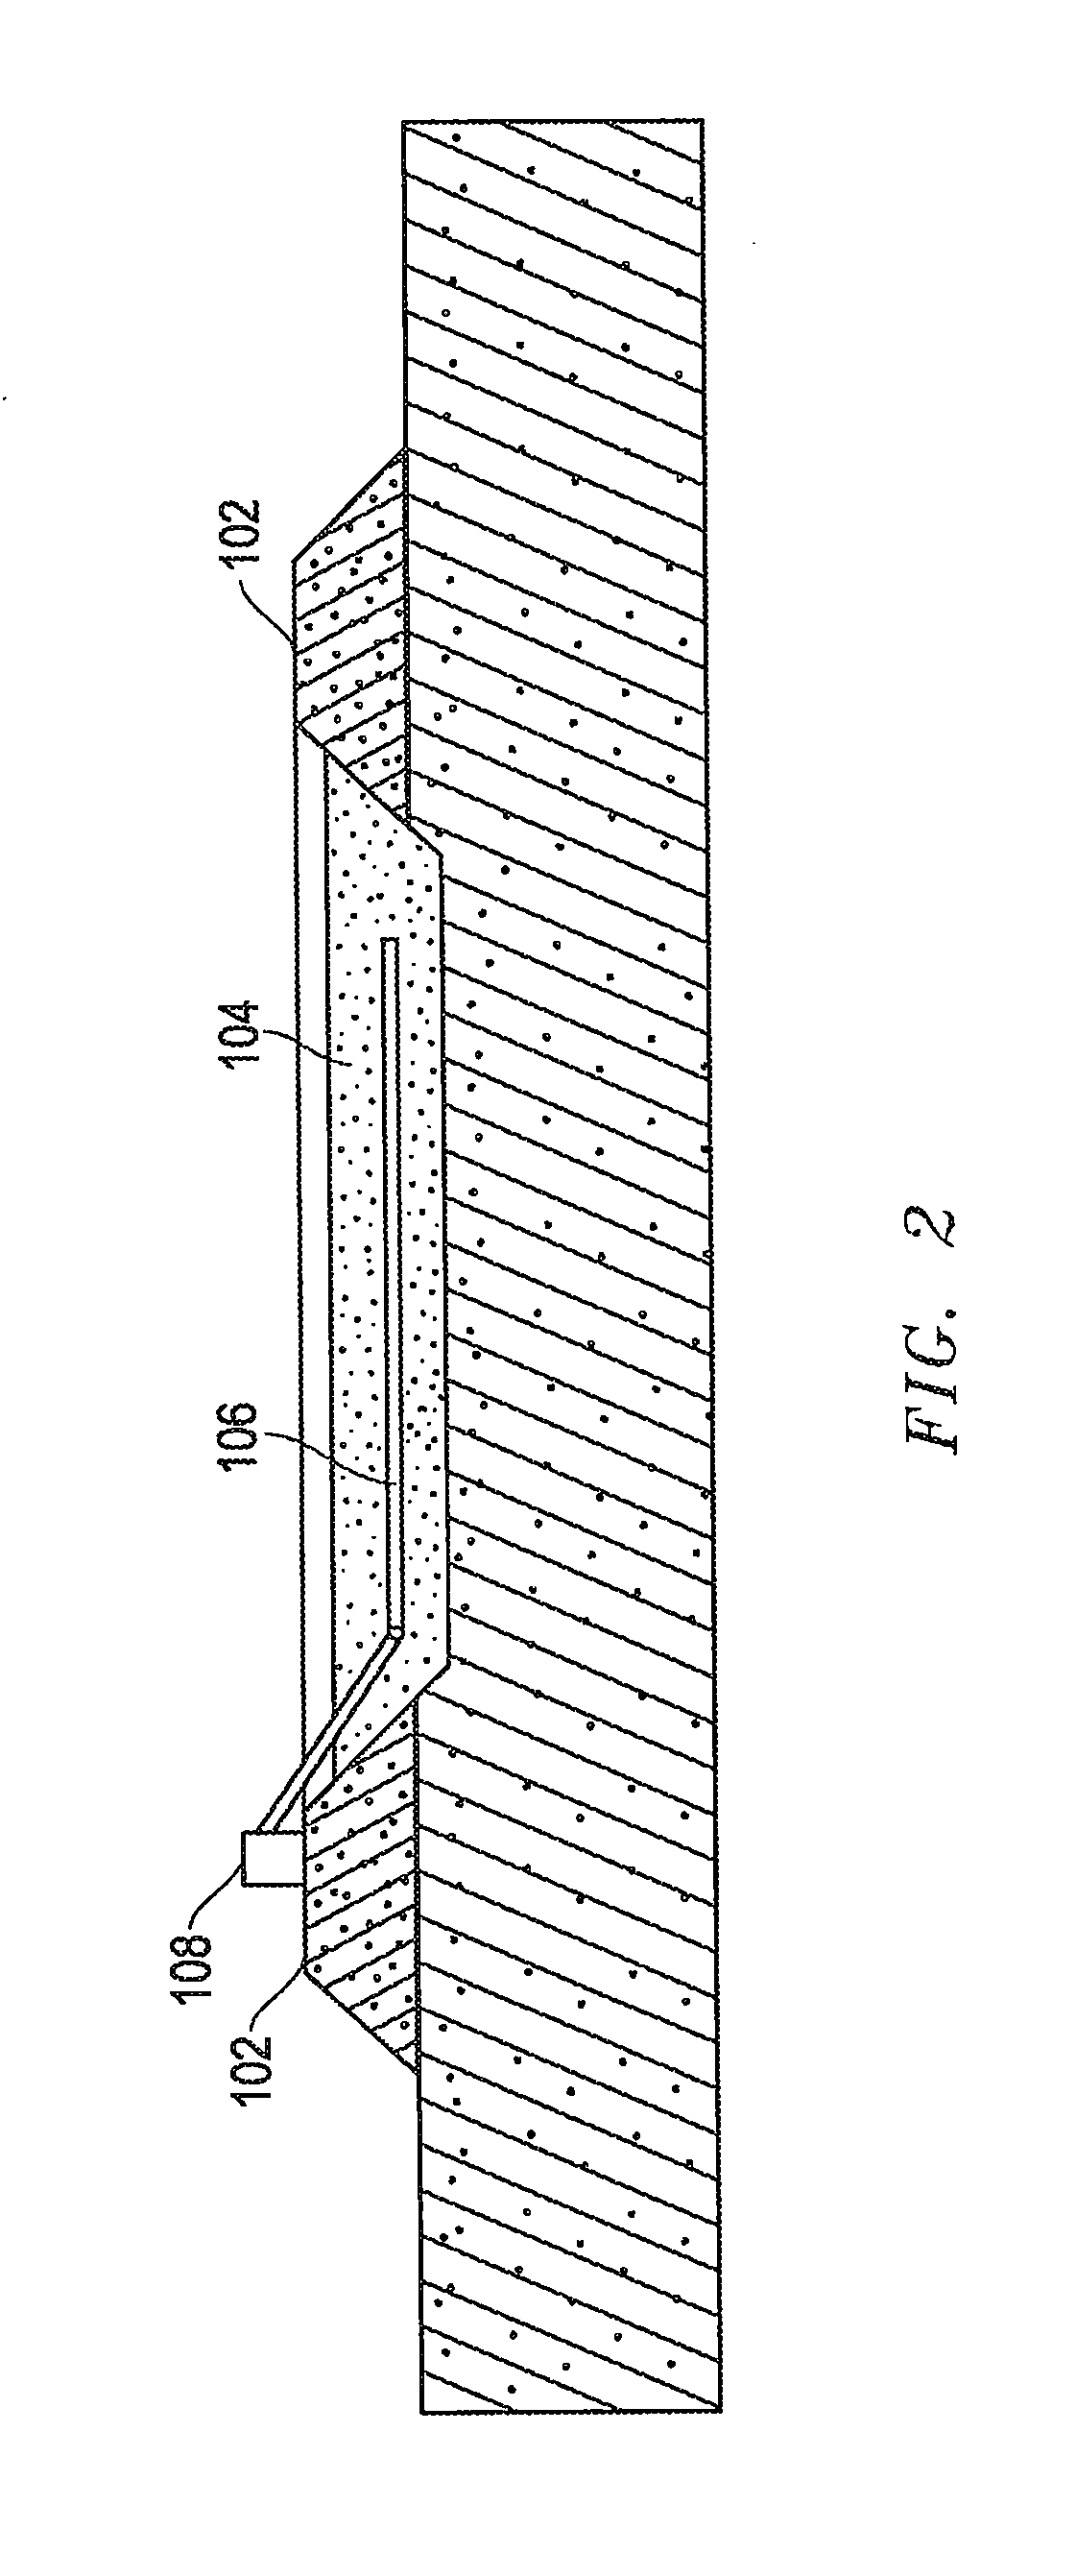 System and method for dewatering coal combustion residuals